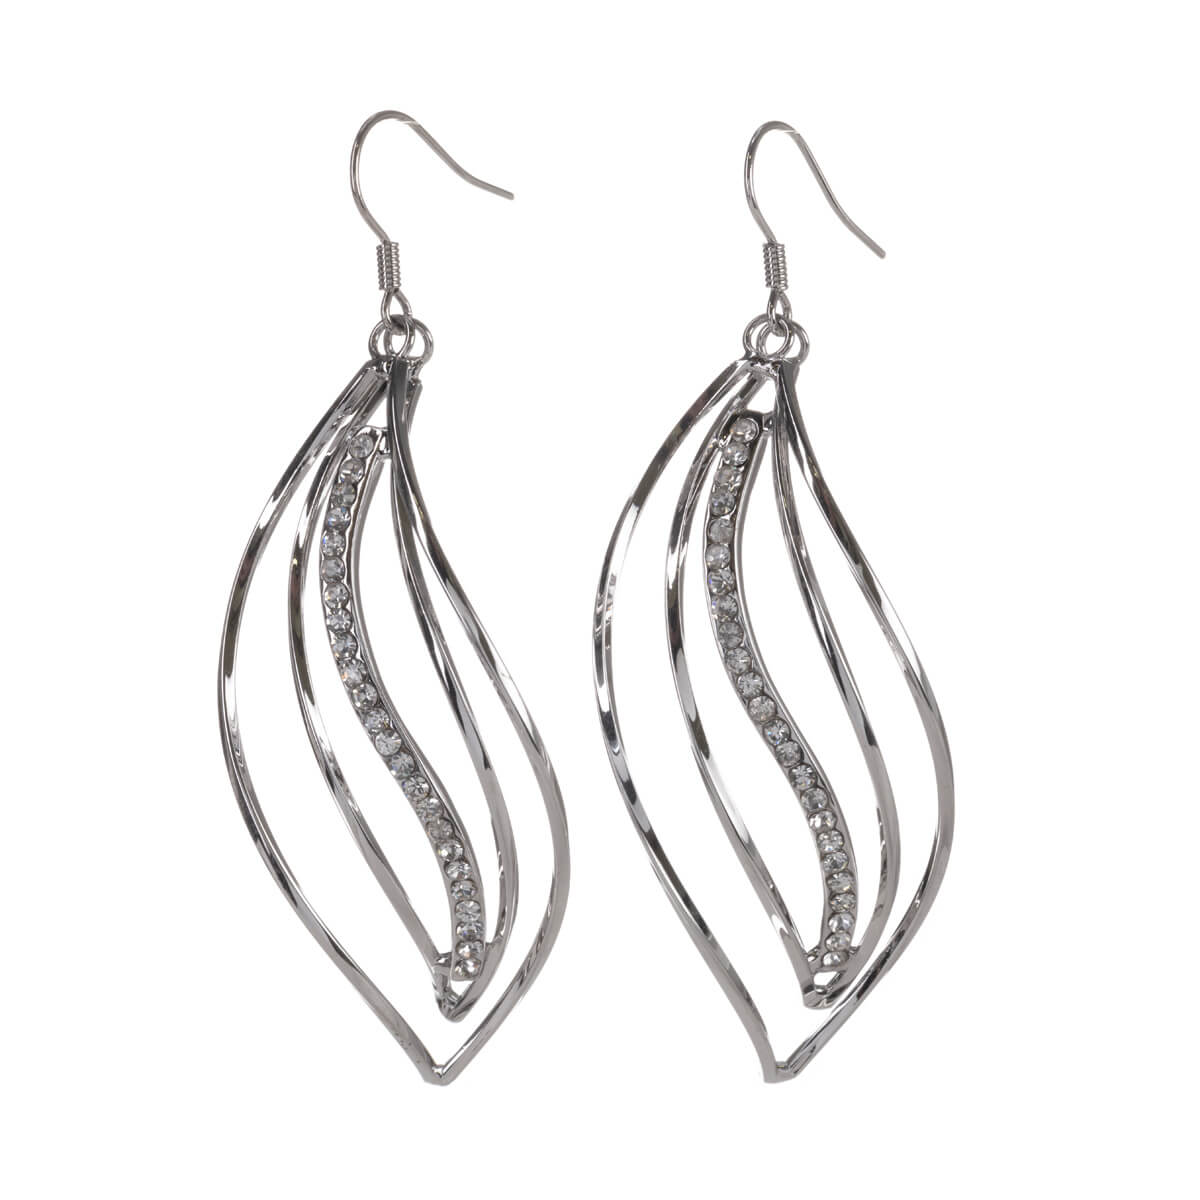 Threaded hanging party earrings